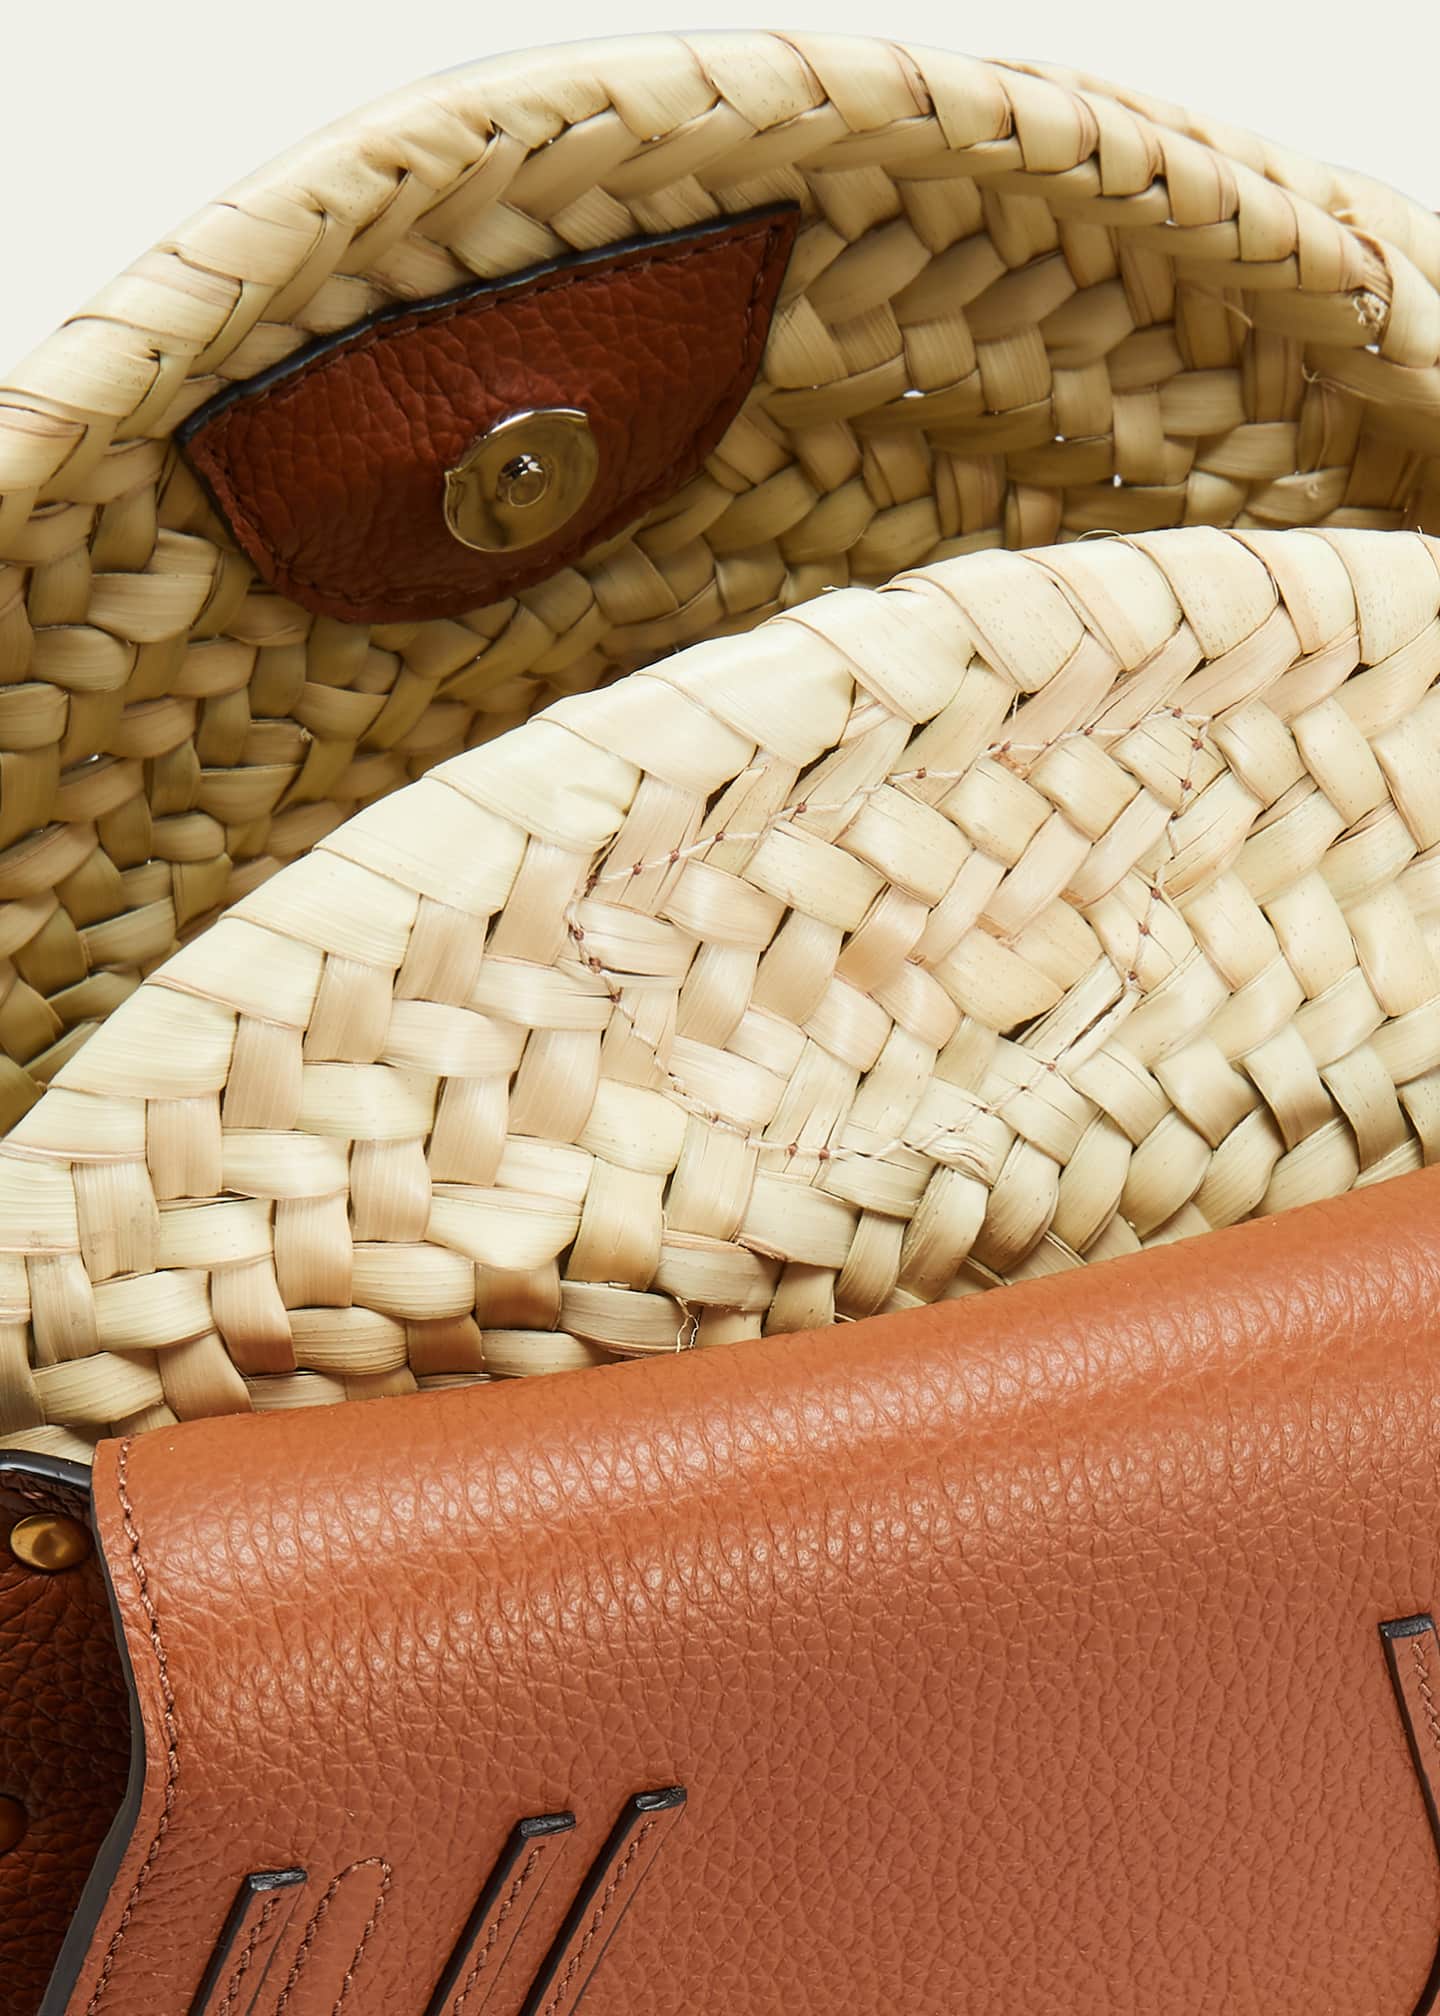 CHLOÉ: Marcie bag in raffia and leather - Camel  Chloé crossbody bags  C23SS736I32 online at